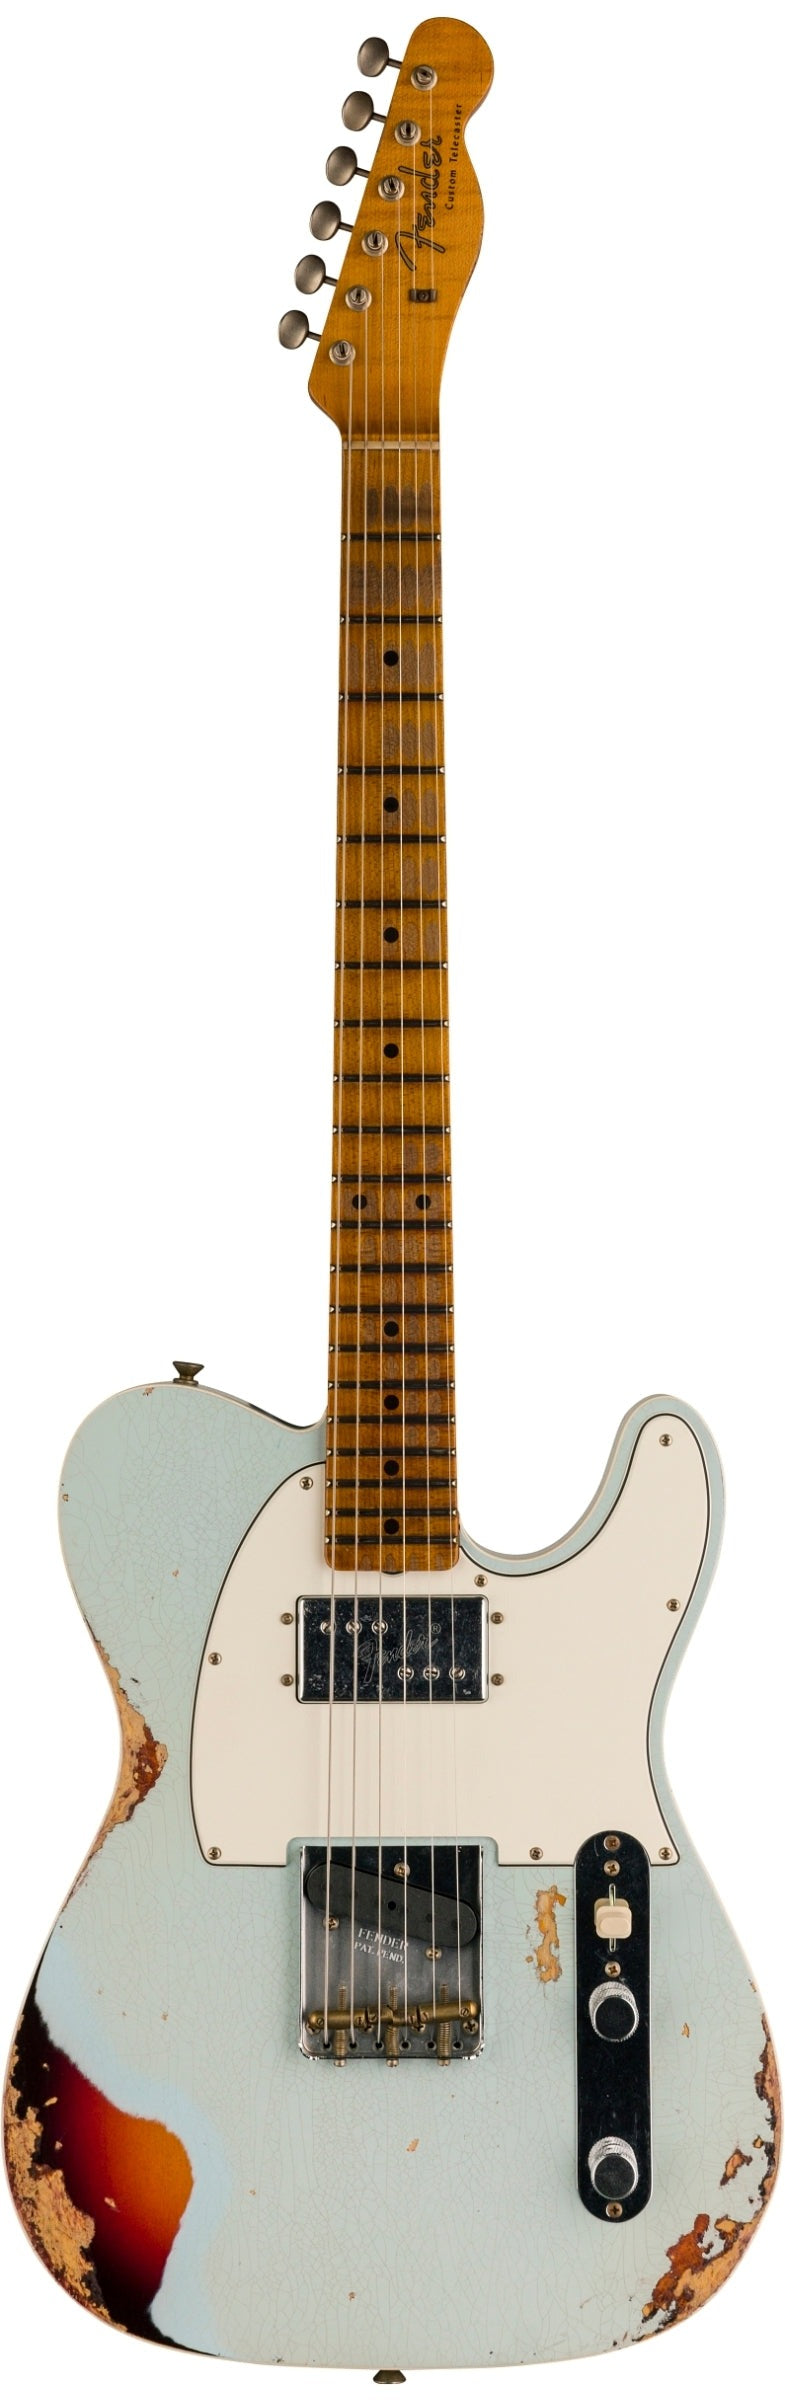 FENDER LIMITED EDITION RED HOT CUNIFE® TELE® - HEAVY RELIC®, AGED SONIC BLUE OVER CHOCOLATE 3-COLOR SUNBURST